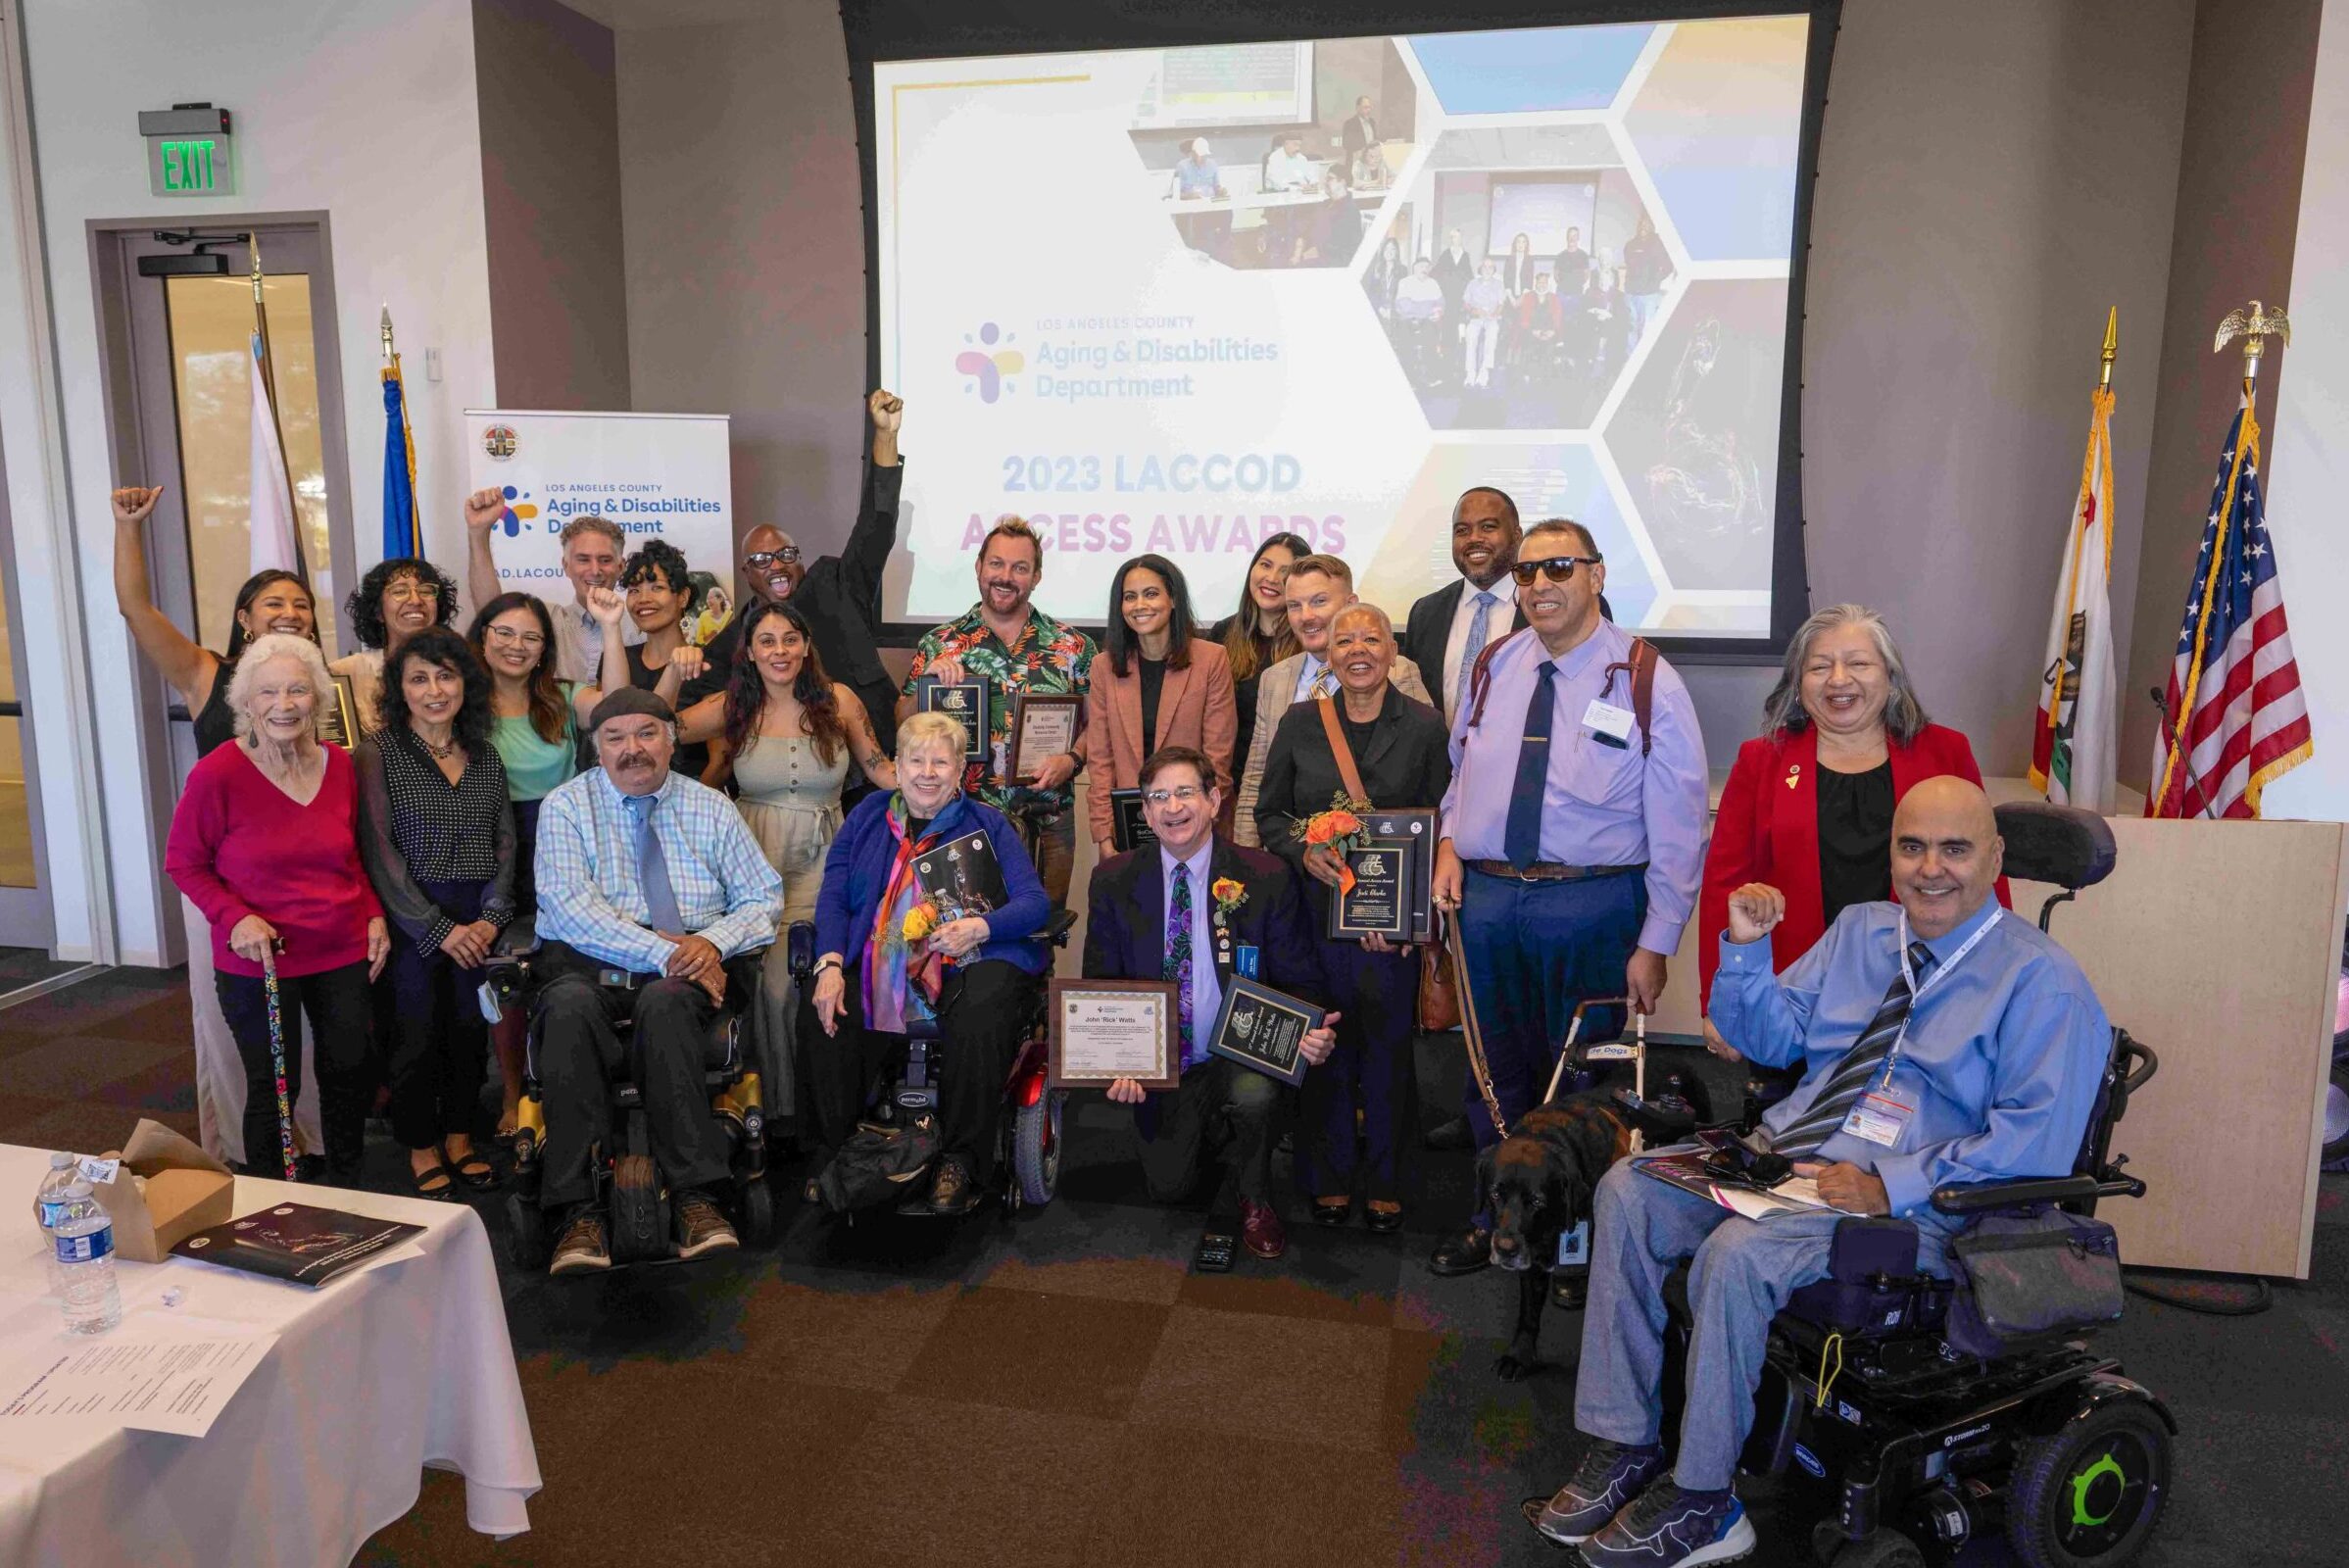 The Los Angeles County Commission on Disabilities Commissioners with the 33rd Award Recipients.